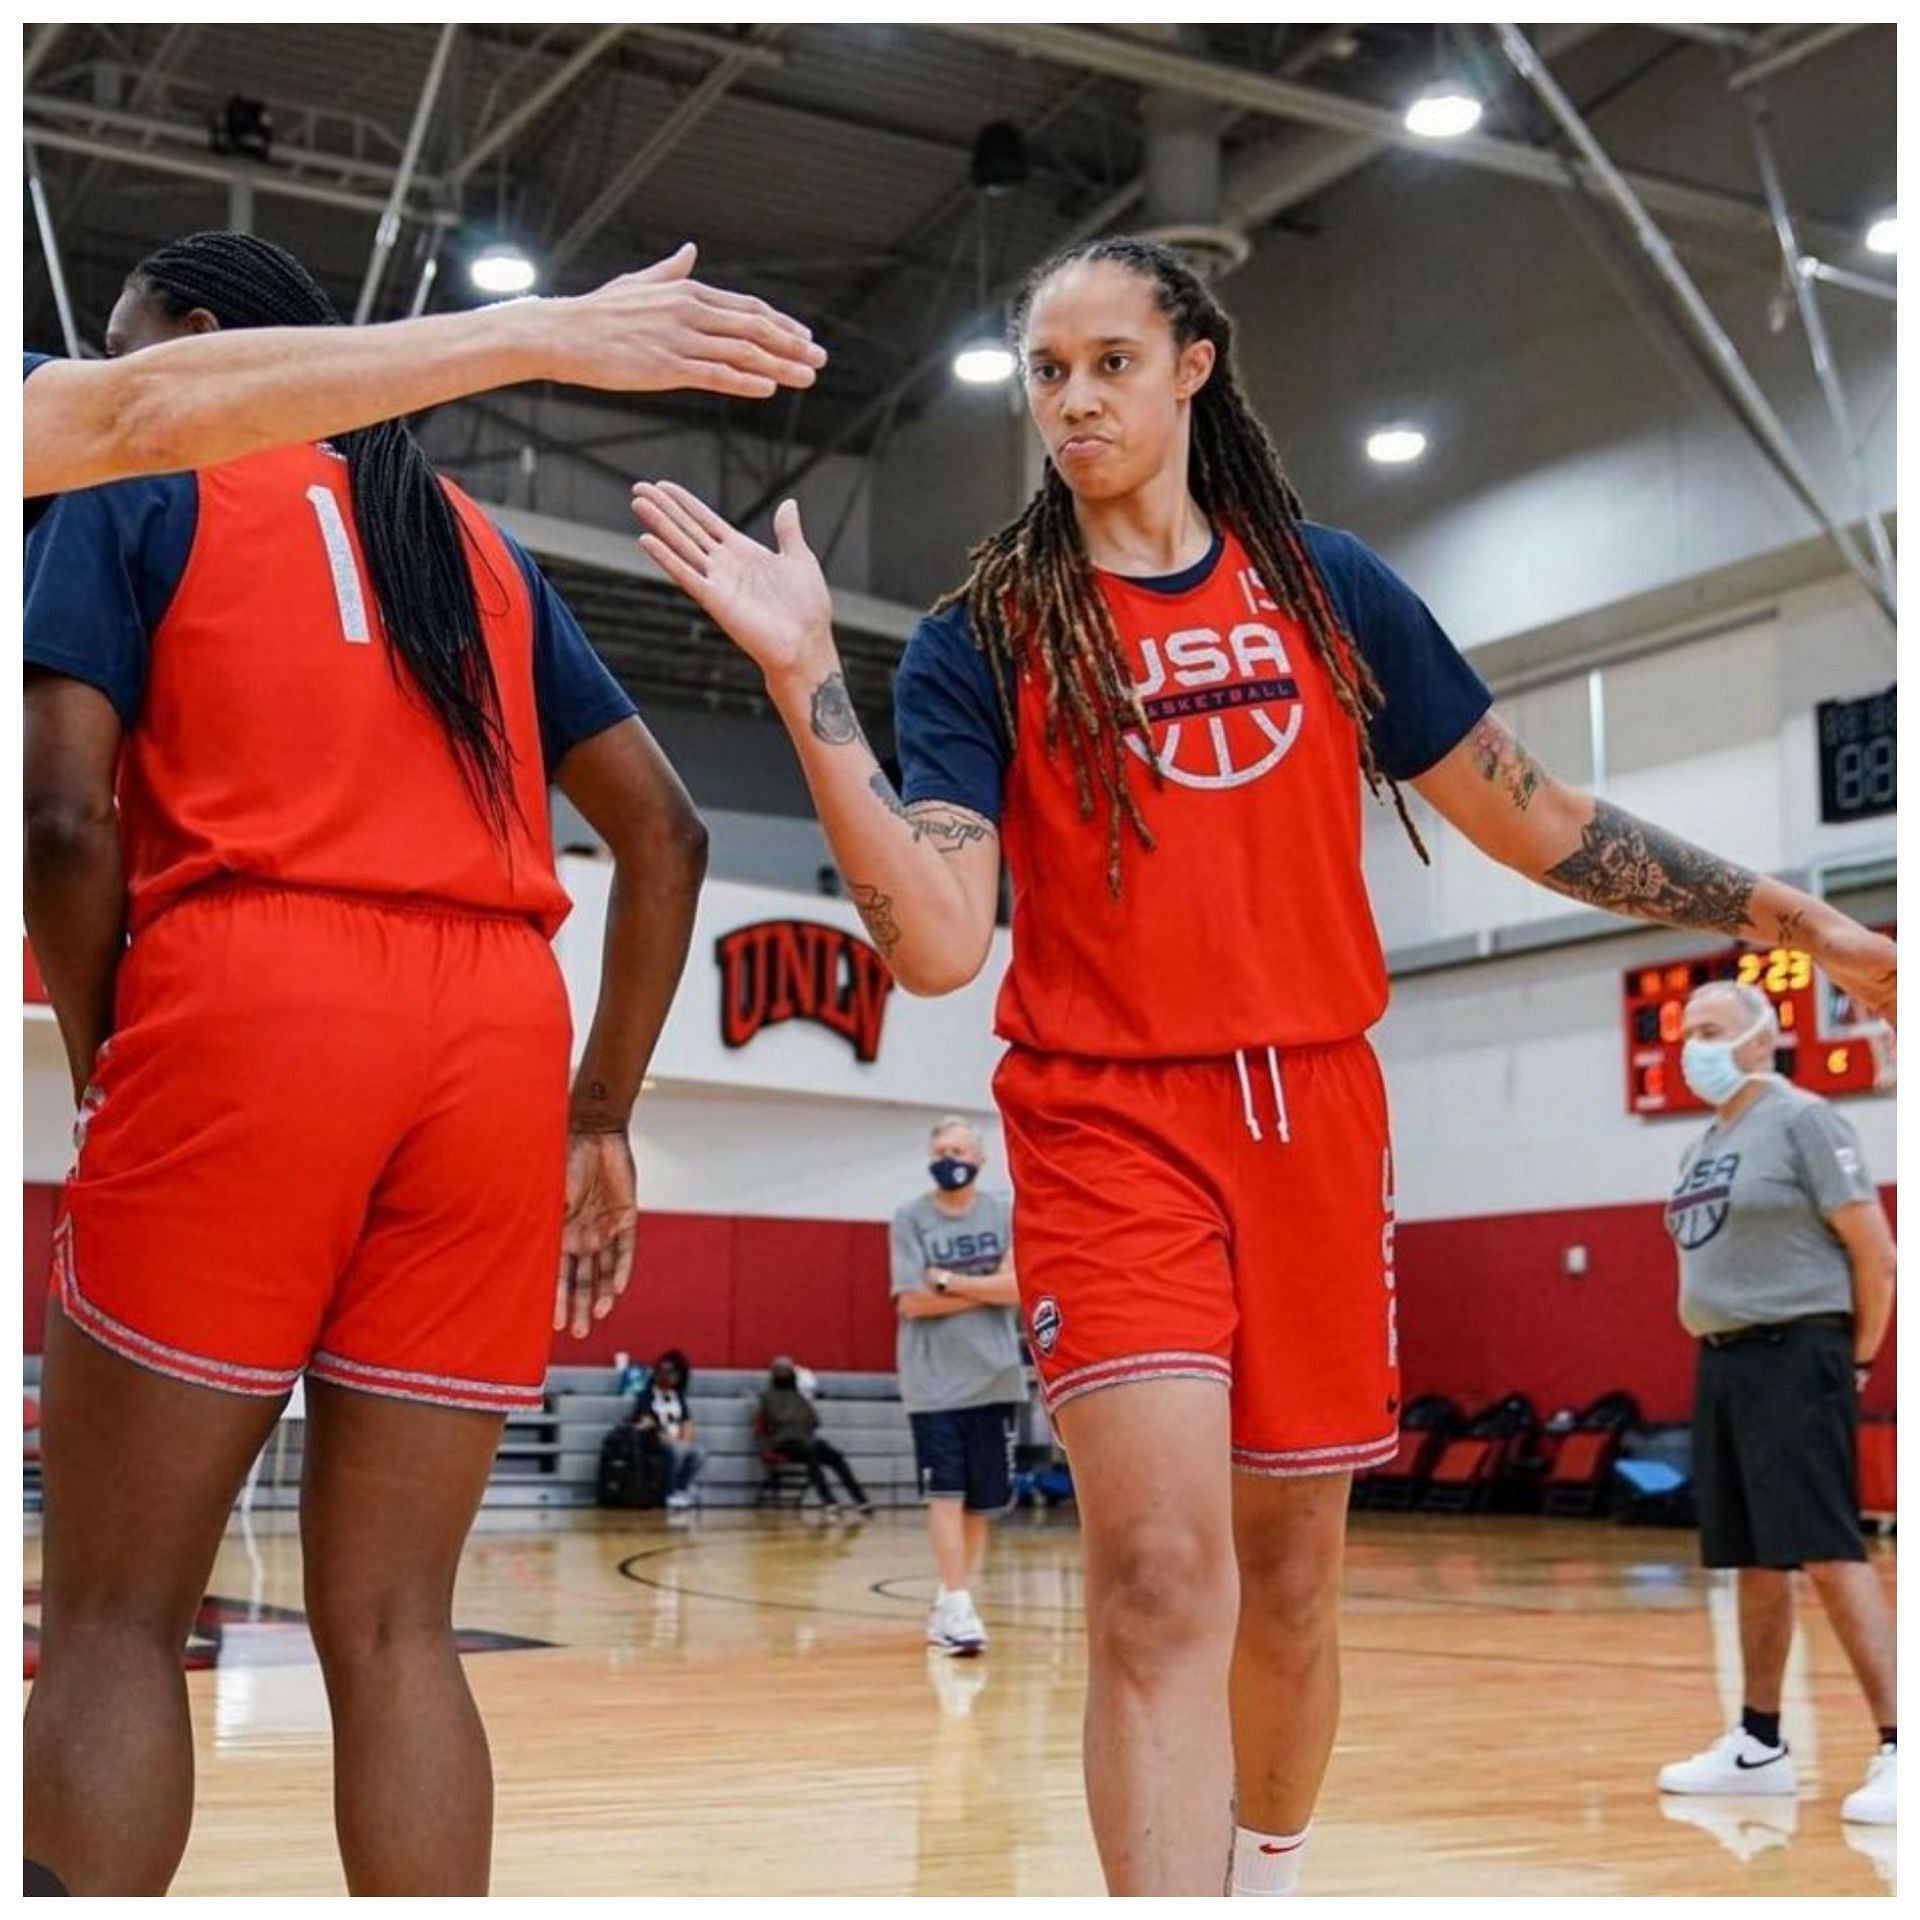 Standing tall: Griner embraces height, challenges she's faced